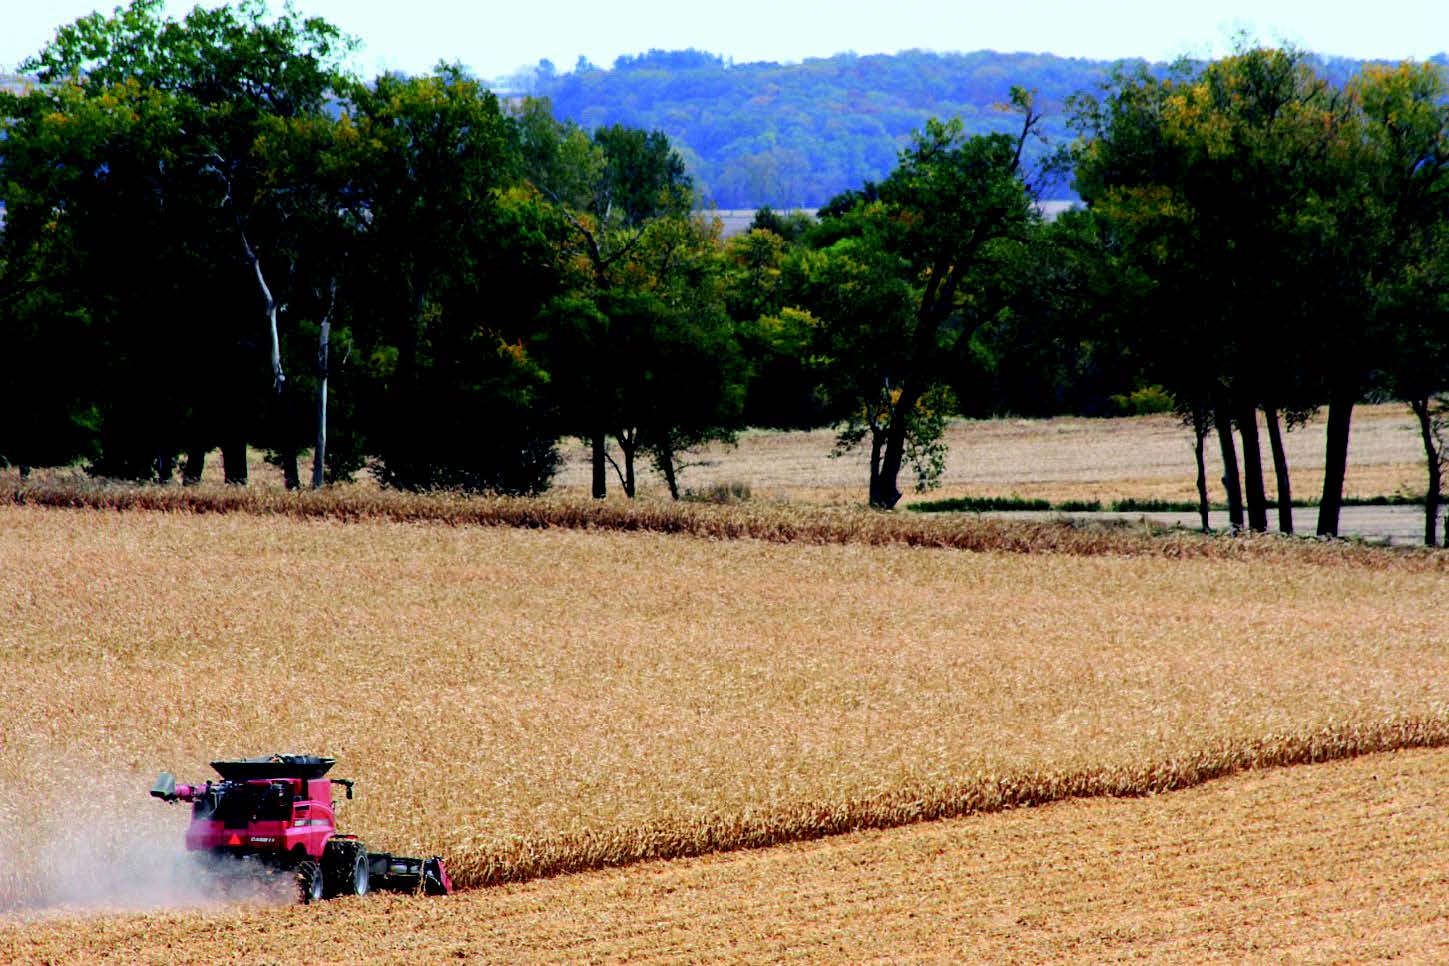 I thought this Case/IH 8240 combine picking corn, between Falls City and Rulo, Nebraska, with the trees in the background made for a great photo opportunity. I talked with a farmer there in Nebraska and he said that most of the corn that was picked or being picked was a bit wet. There was definitely more soybean harvesting going on but it was good to find some corn being picked.